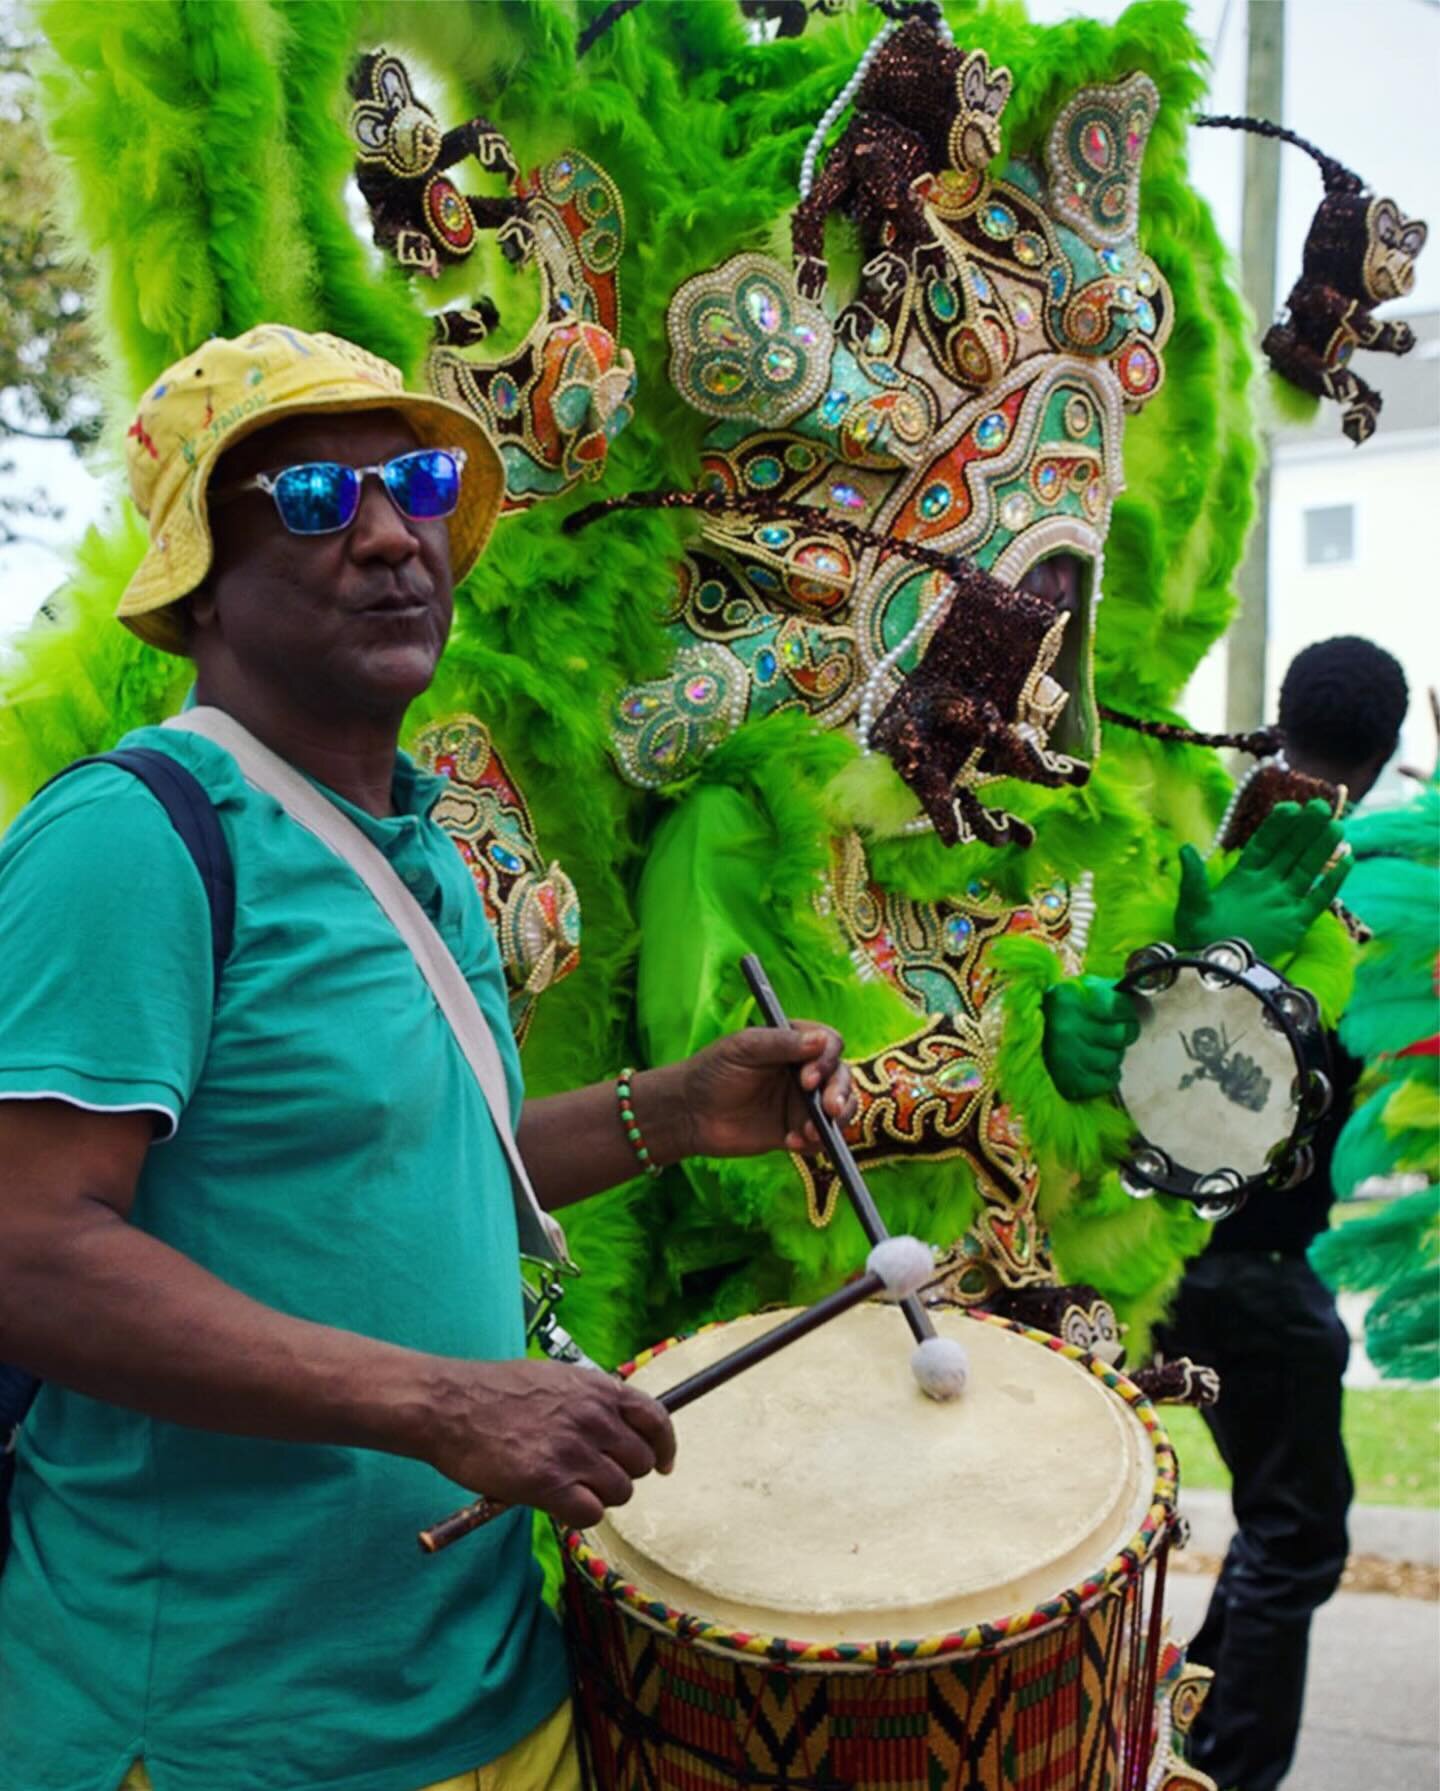 Thanks to @nolanews and @dougmaccash for the backstory on Big Chief Shaka Zulu&rsquo;s fabulous Monkey Mosaic suit. I was able to grab this shot of him and his drummer at Uptown Super Sunday. 
.
.
.
#mardigrasindians #blackmaskingindians #supersunday